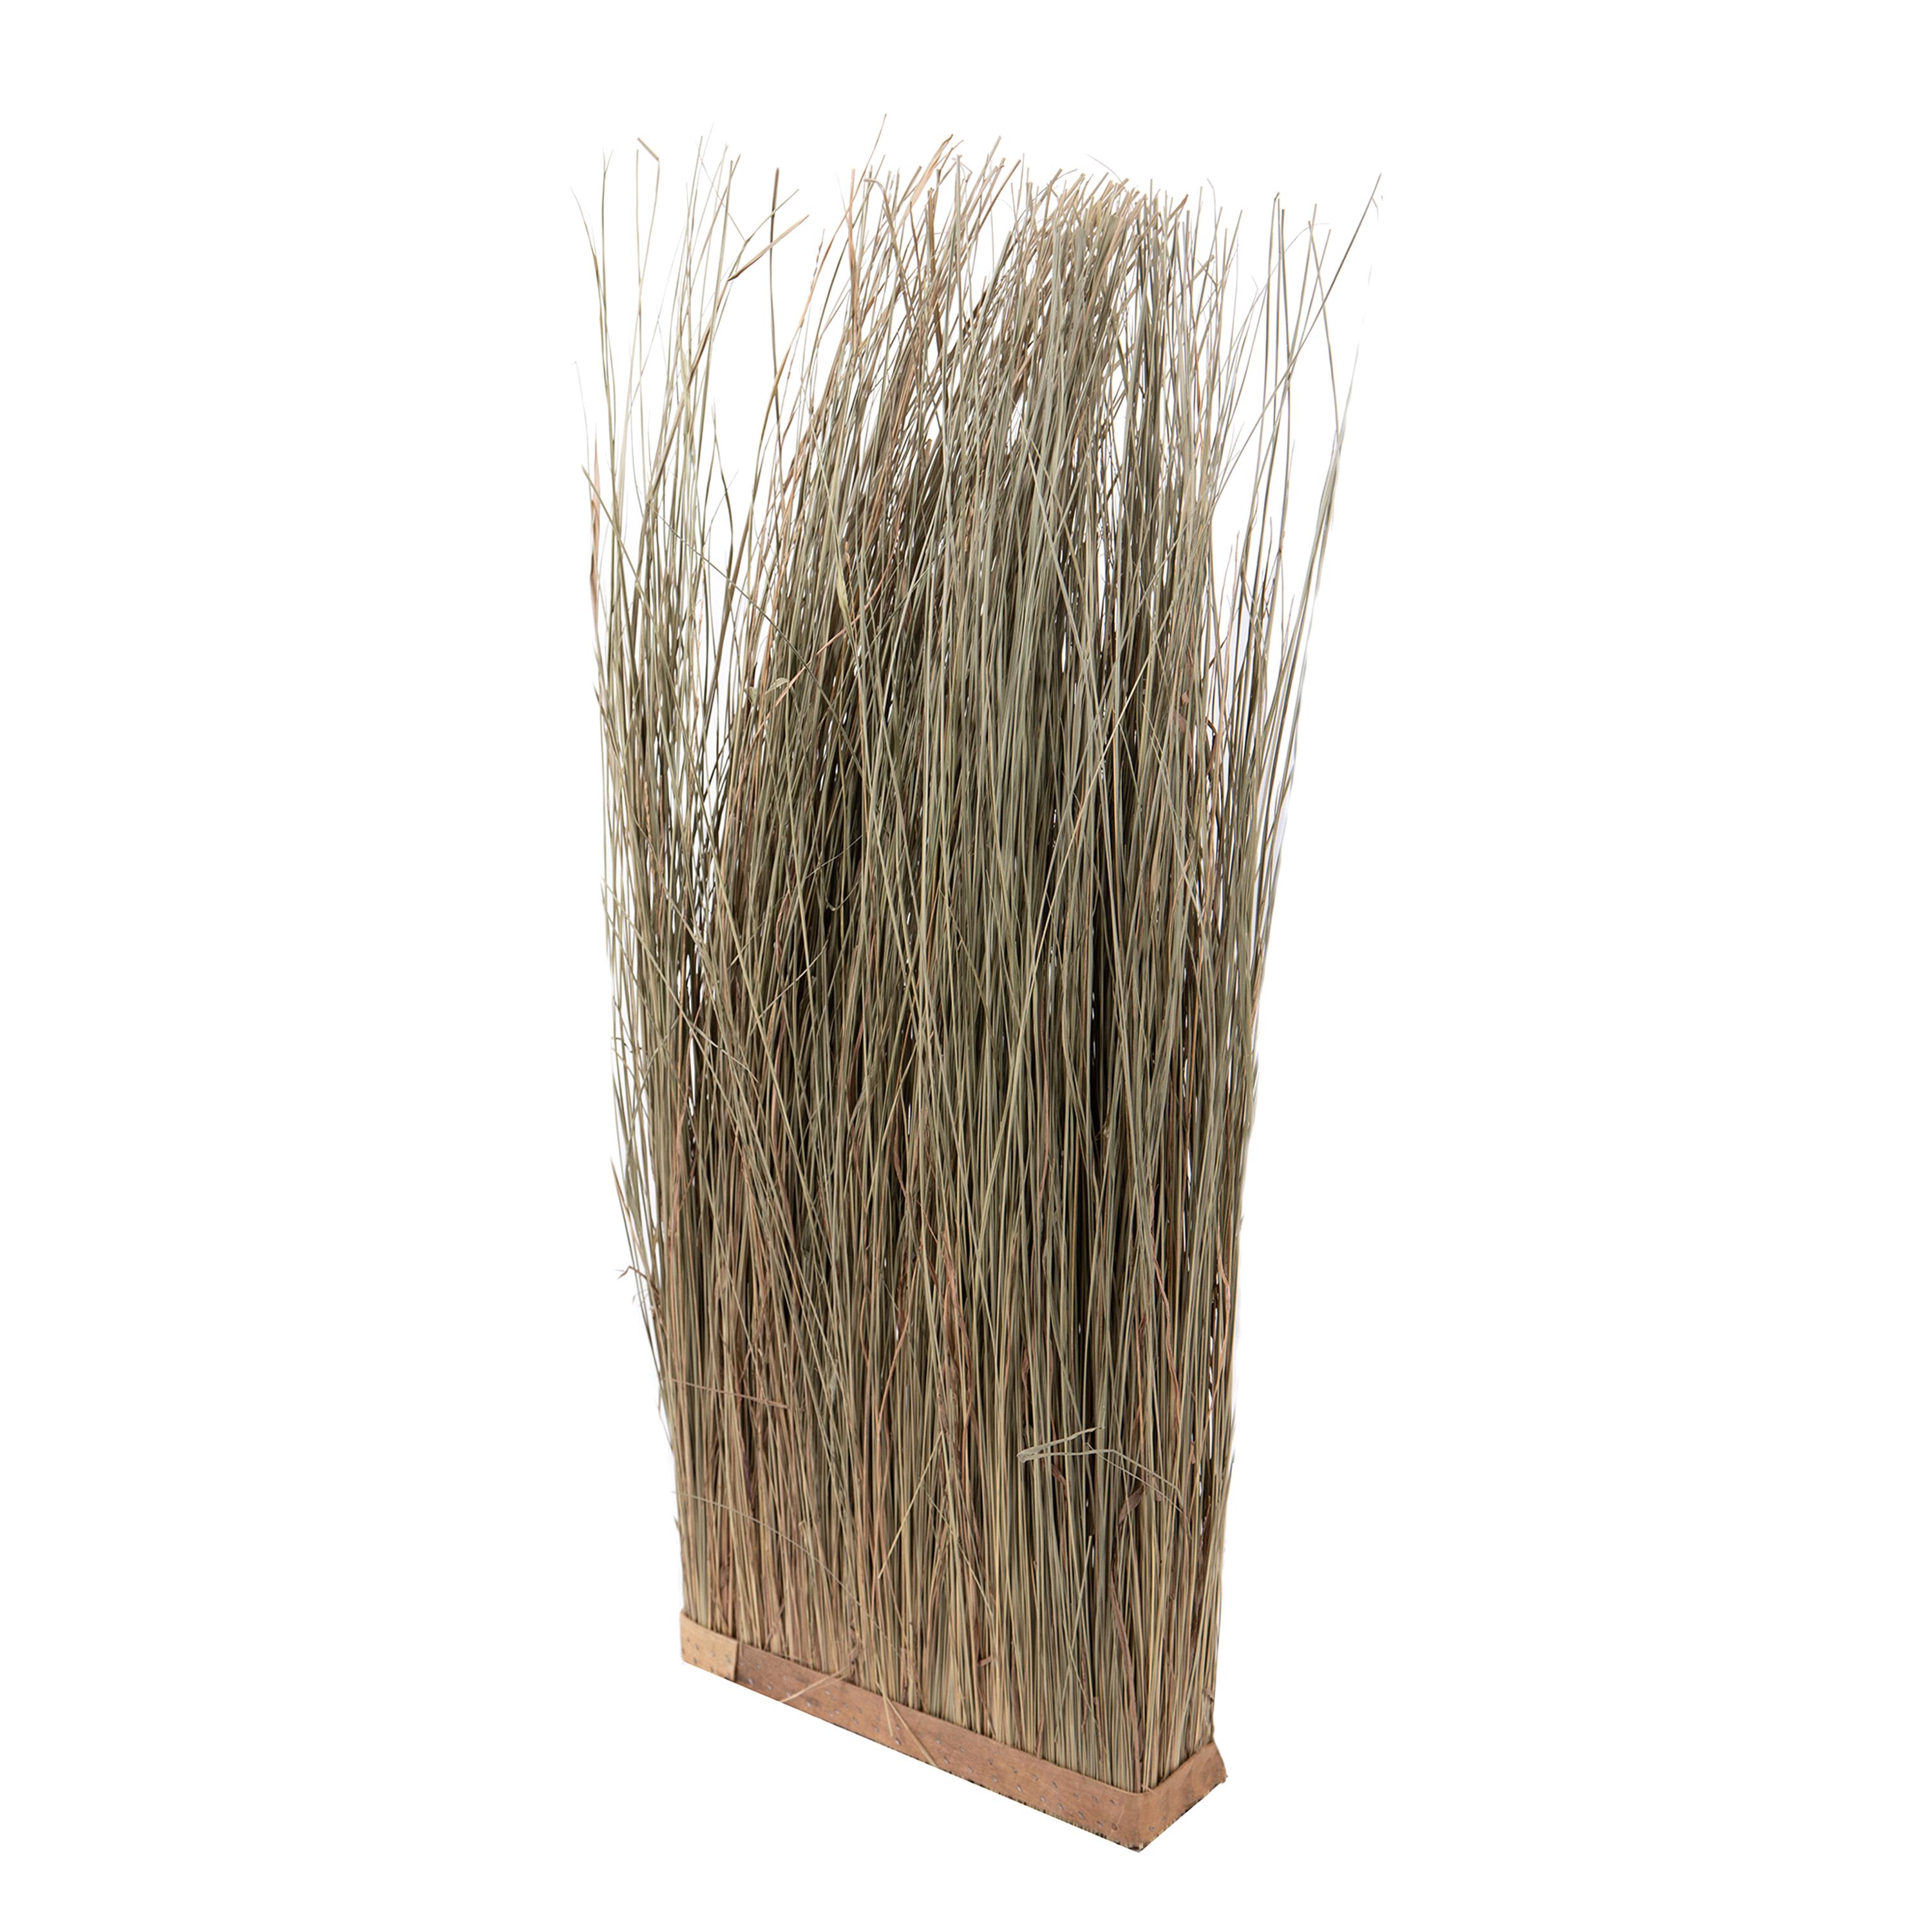 NATURAL PRODUCTS DRIED FLOWERS AND ERBS, BAMBOO,MANZANITE, TRUNKS, BANDS, NATURAL STRUCTURE, PARETE ERBA 38XH100 CM